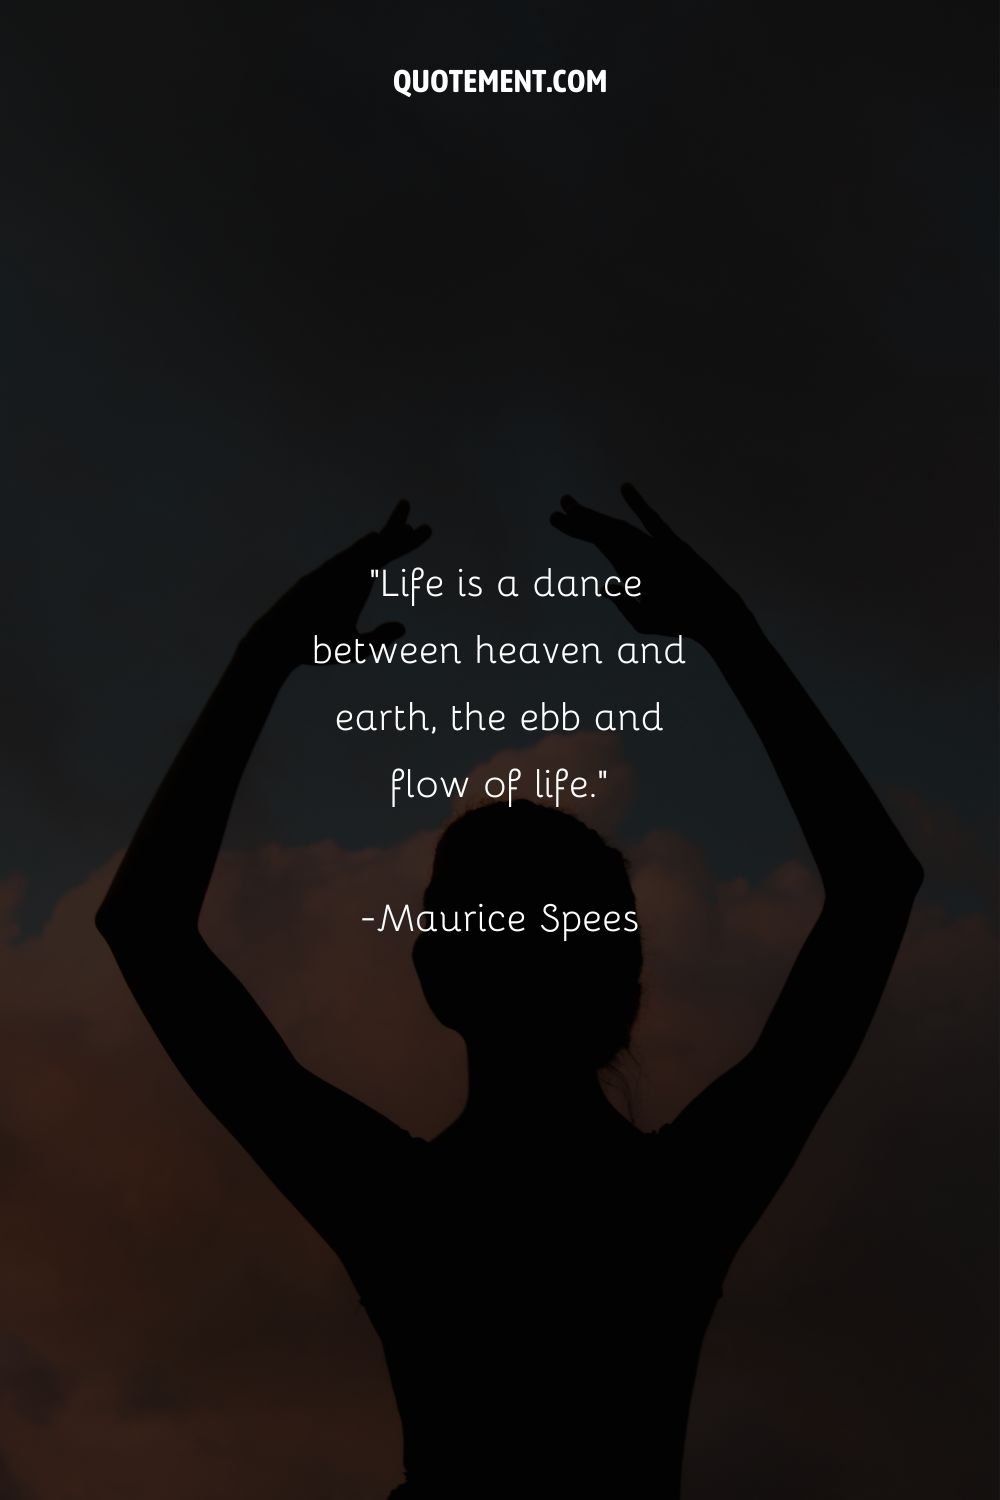 a dancer's silhouette representing quote about passion for dance